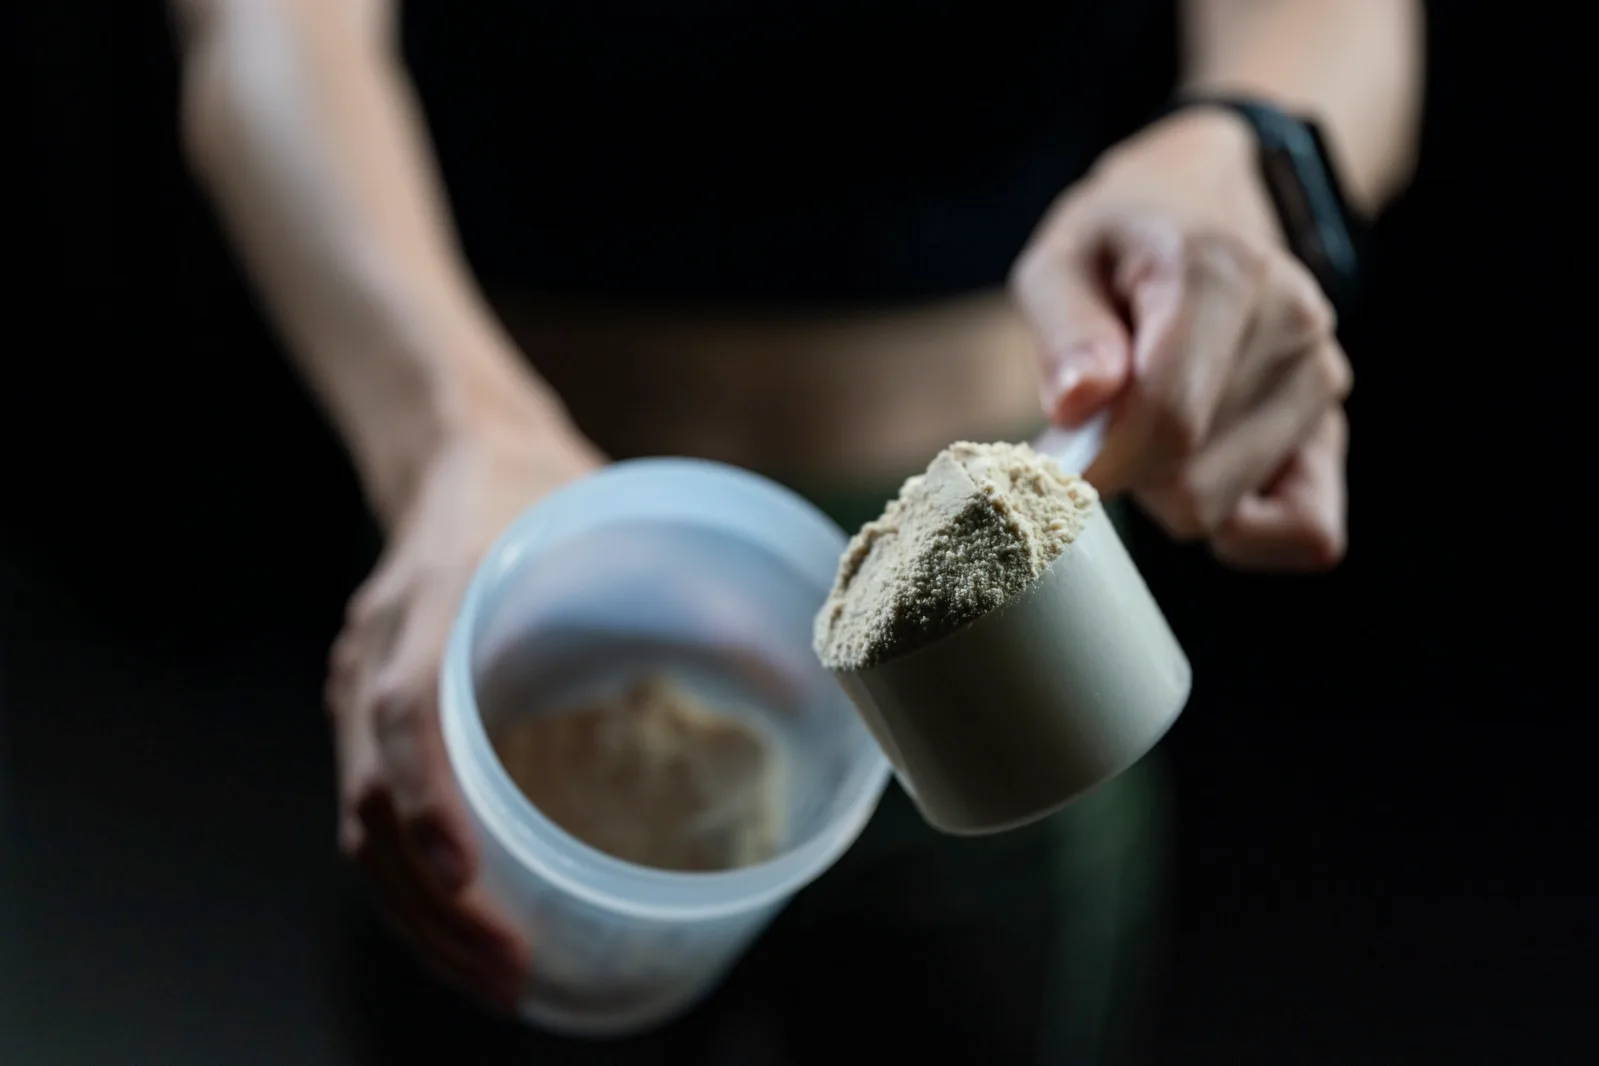 How Many Grams Is a Scoop of Protein Powder? – Torokhtiy Weightlifting